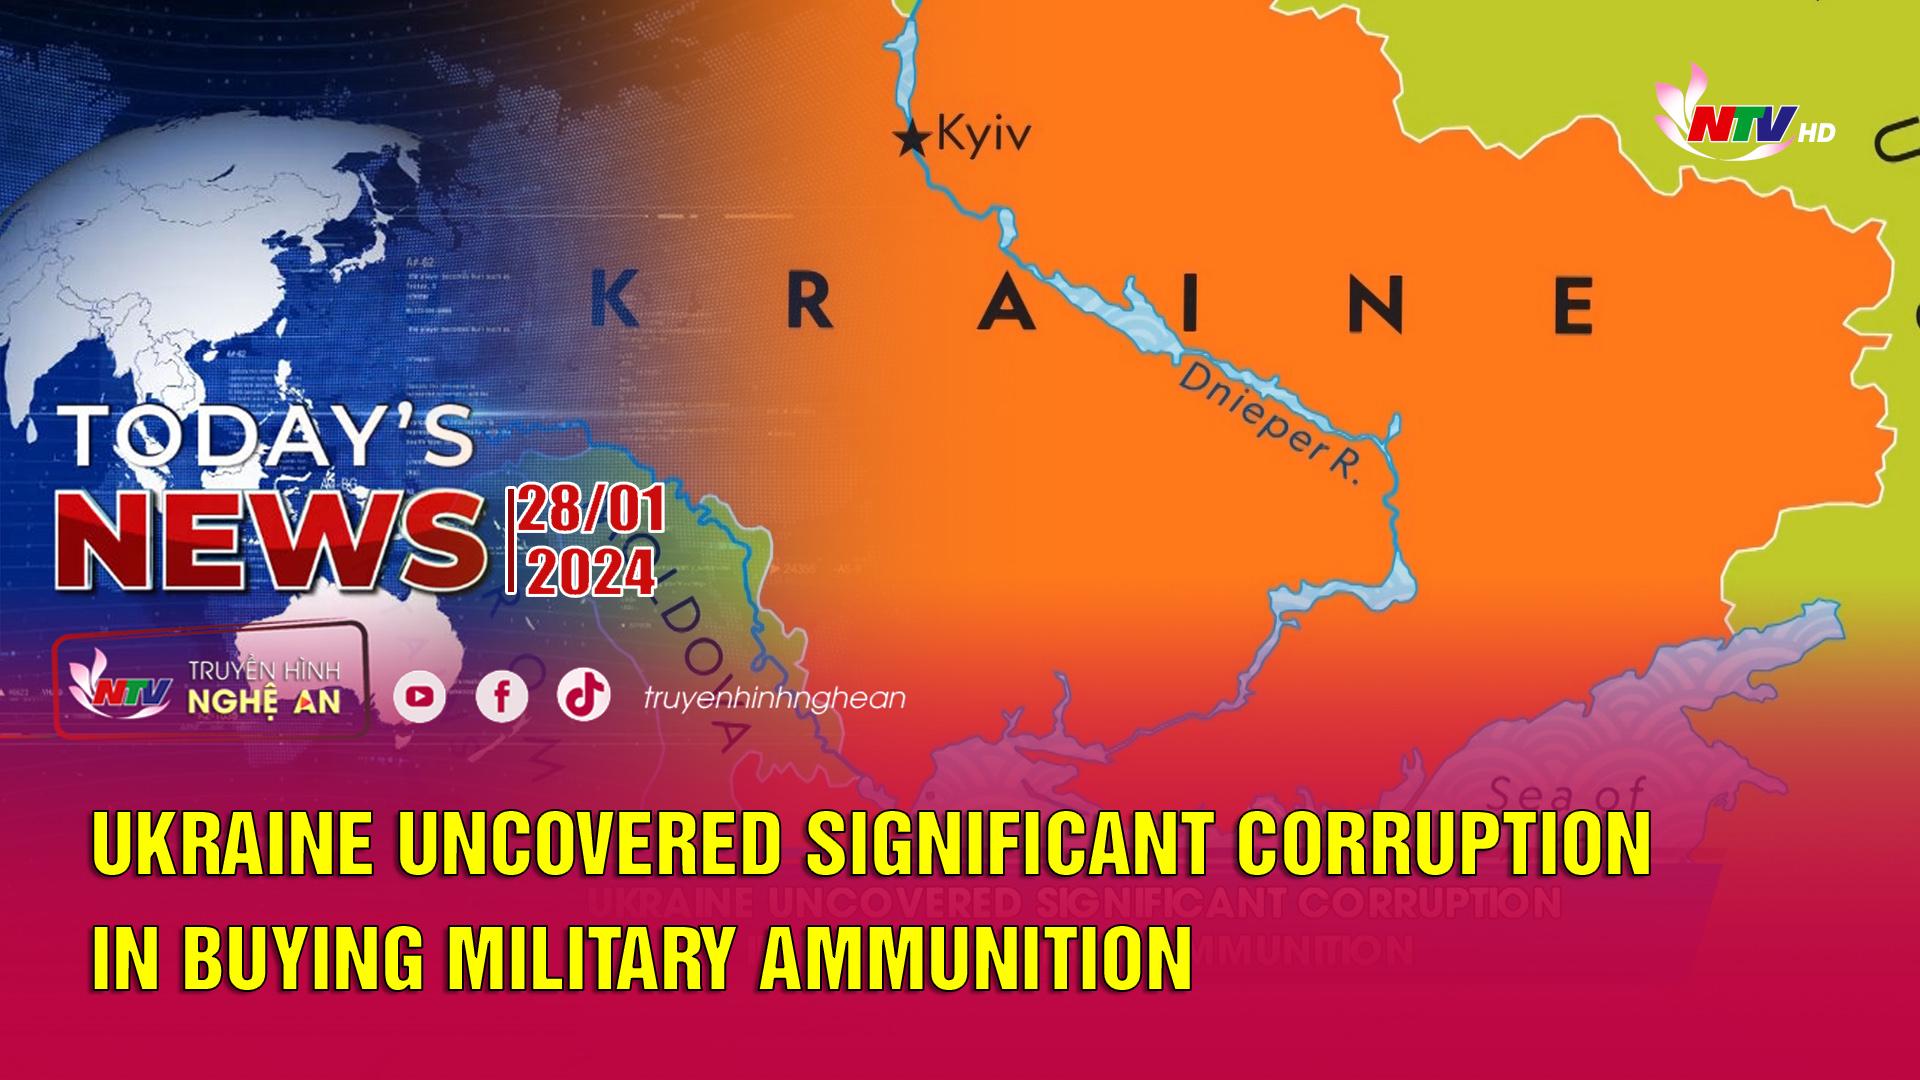 Today's News - 28/01/2024:  Ukraine uncovered significant corruption in buying military ammunition